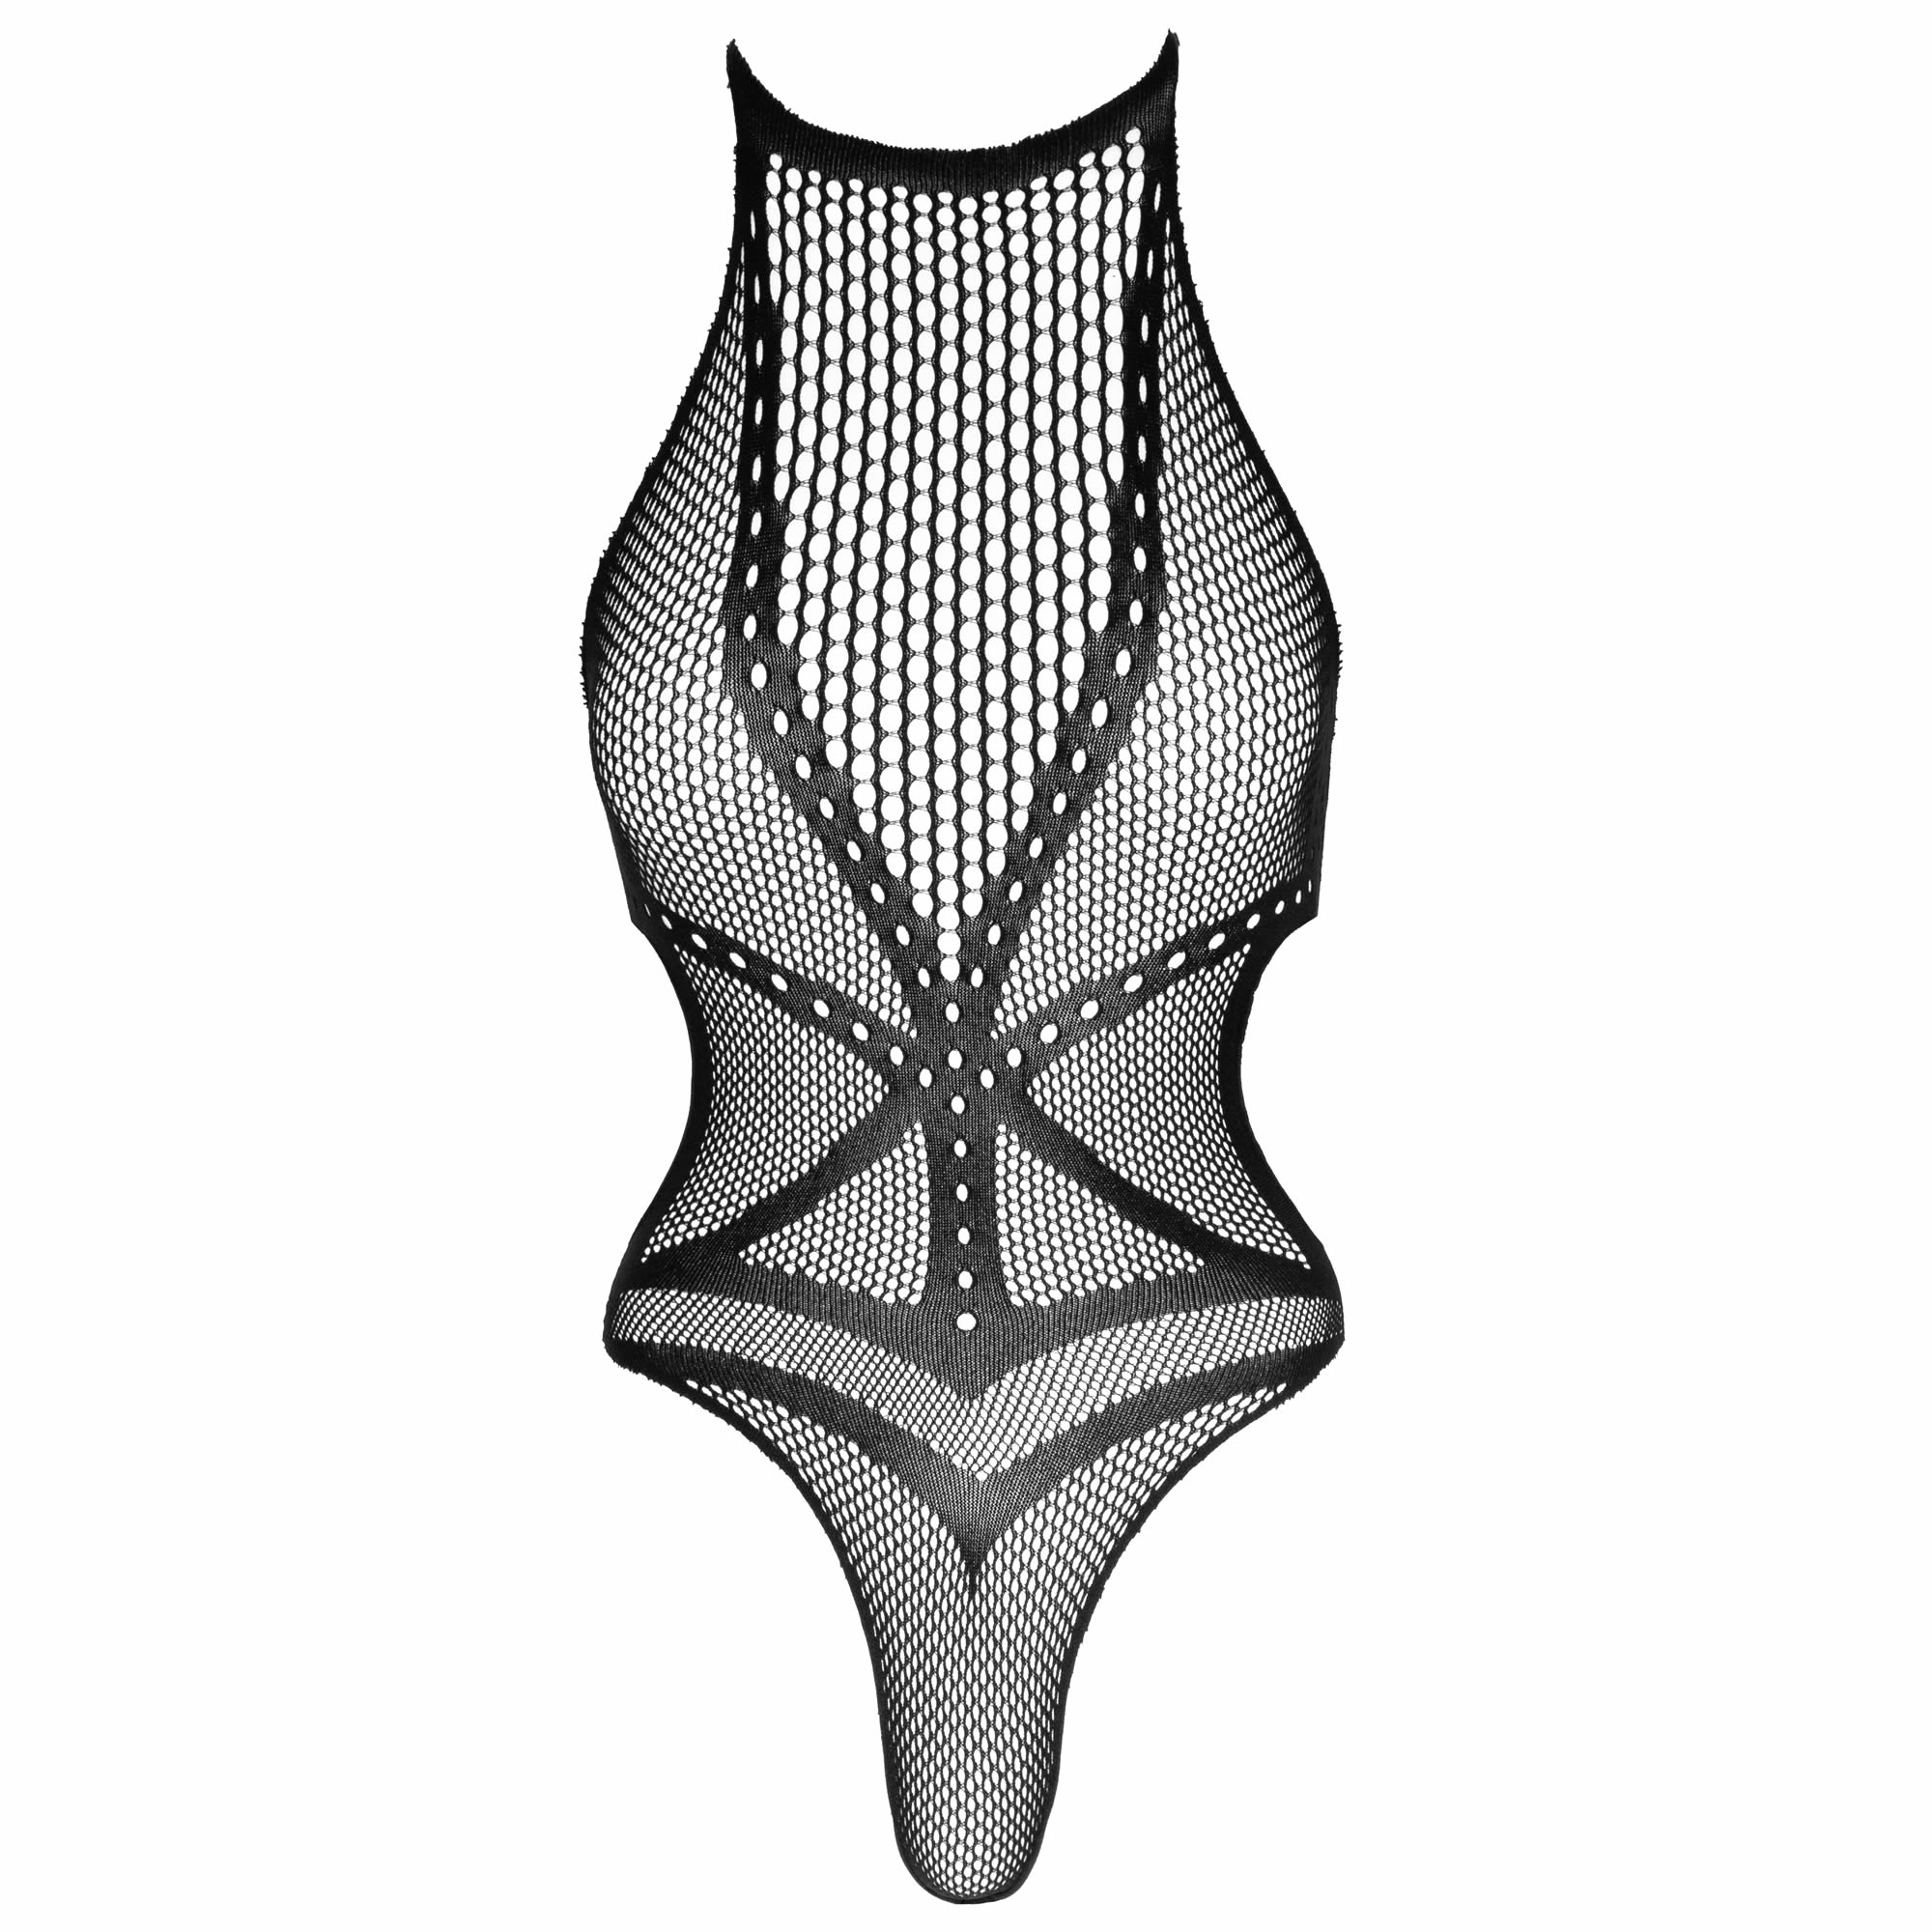 NO:XQSE Net Body with Harness Design